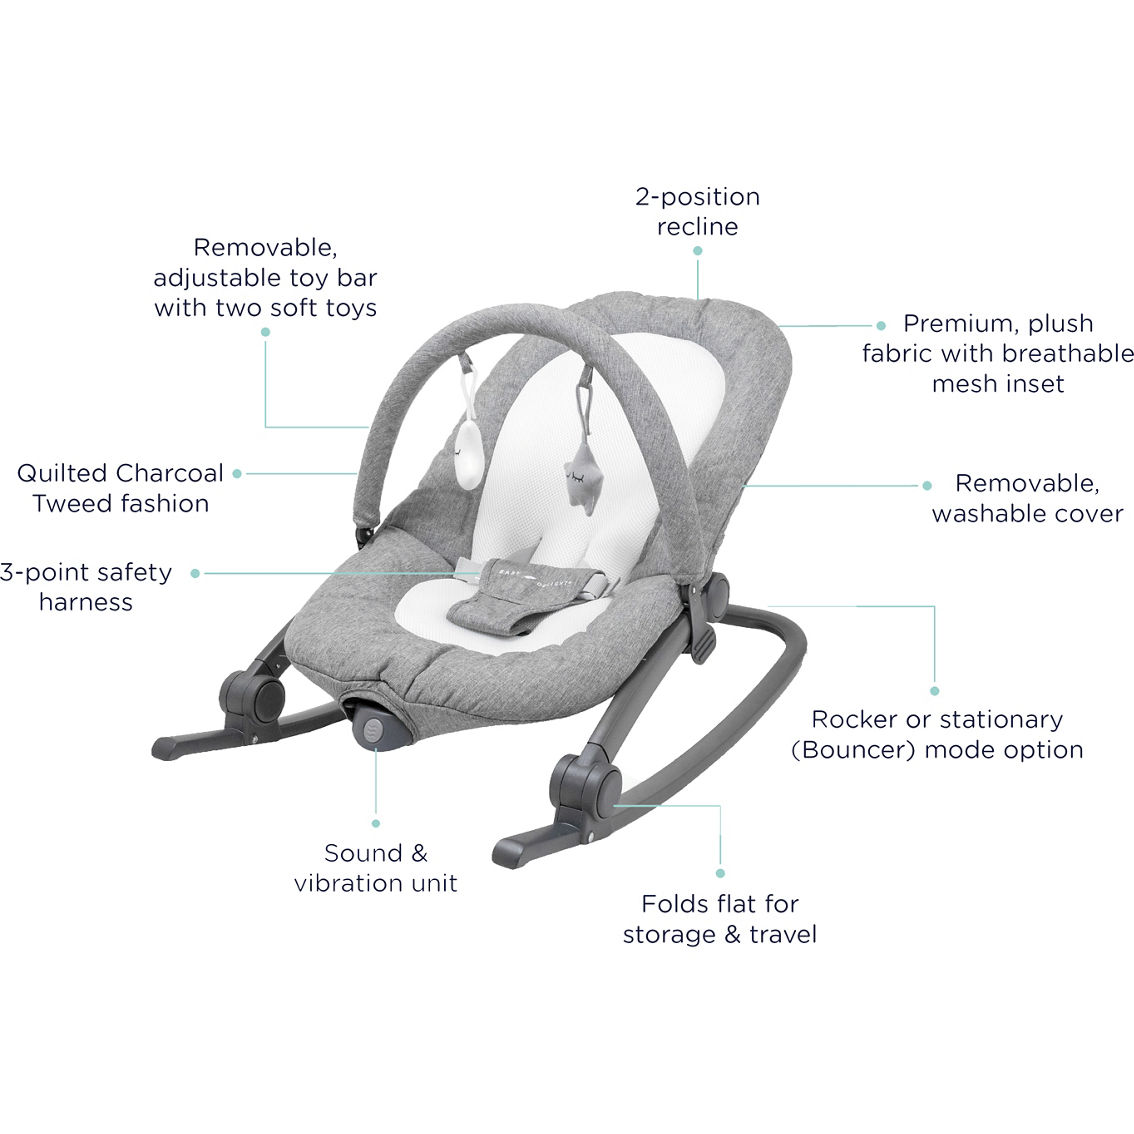 Baby Delight Aura Deluxe Portable Rocker and Bouncer - Image 5 of 6